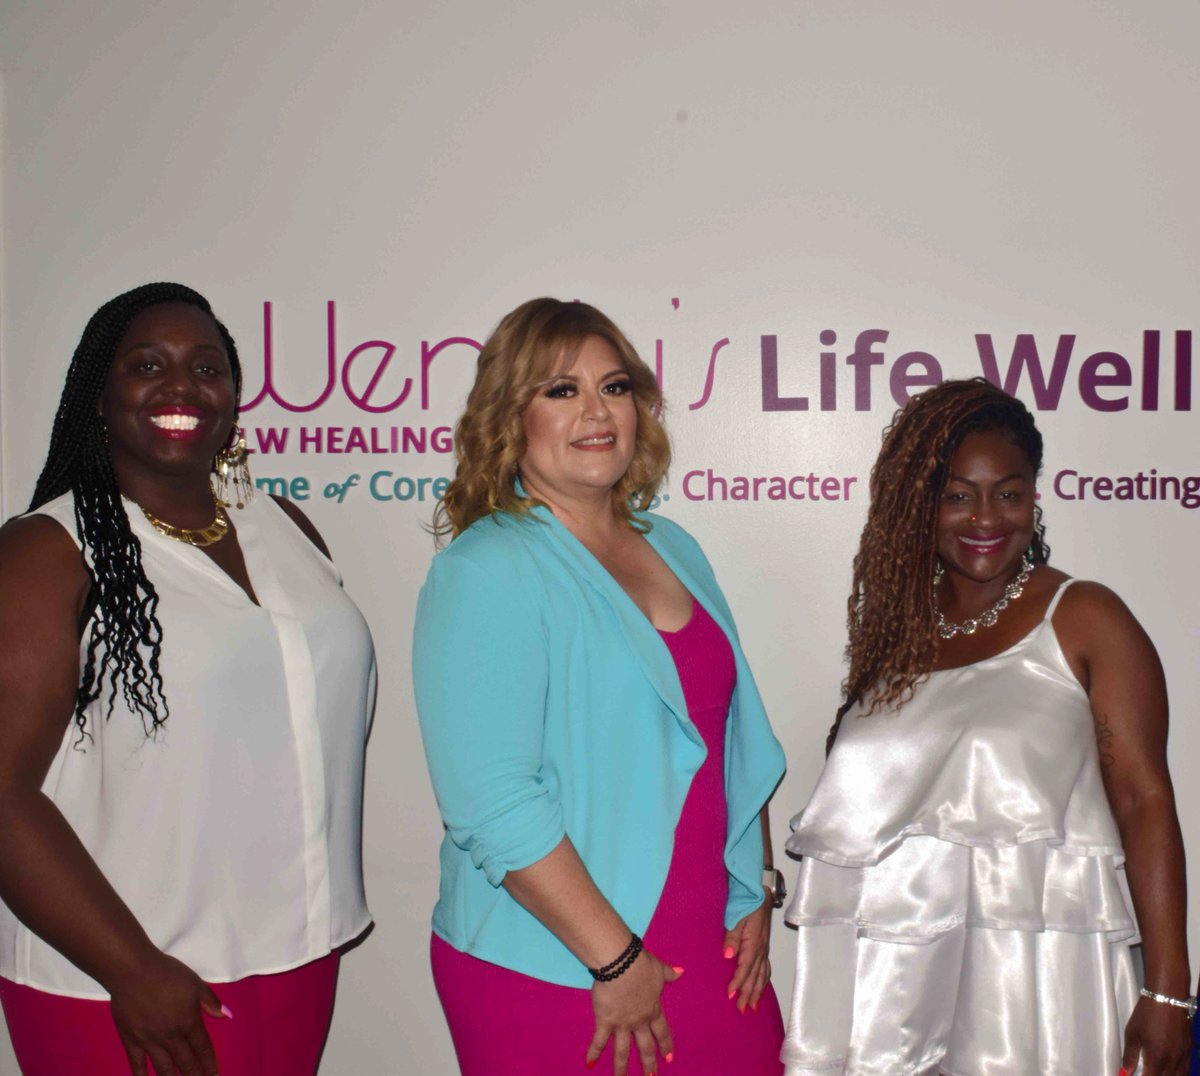 WLW HEALING HOUSE Clinicians/Mental Health Providers - L to R 
Porsche George MS LMFT
Lupe Marquez MS AMFT
Wendy Whitmore MS LMFT

Connect with a provider WLWHEALINGHOUSE@gmail.com